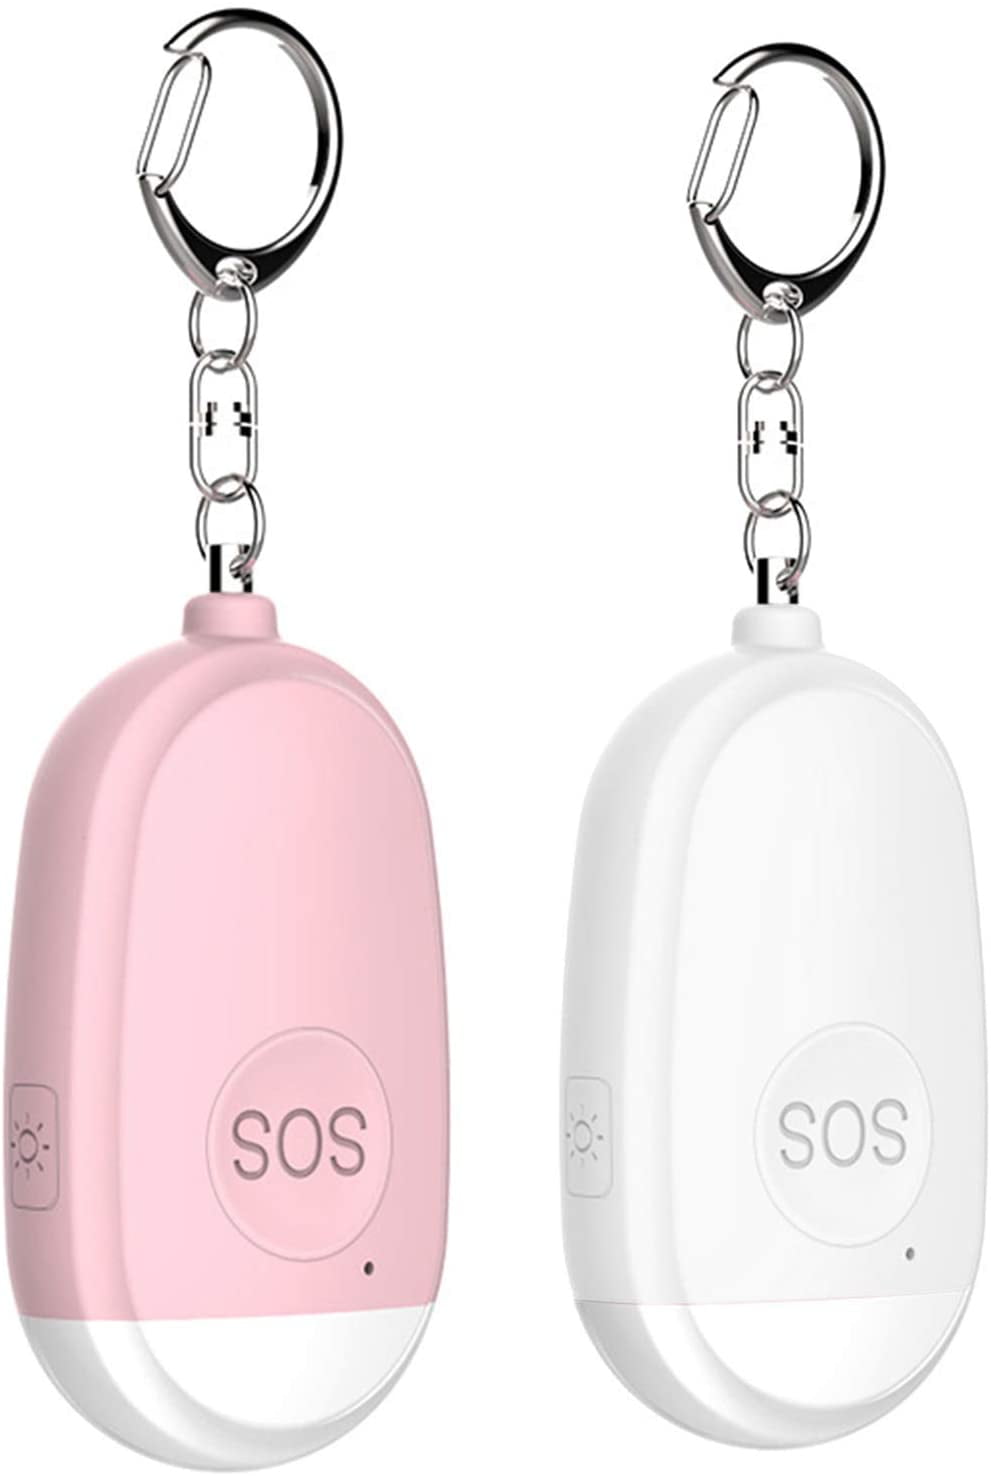 6 Pieces Personal Security Alarm Keychain 130dB Safe Sound Alarm Keychain Emergency Safety Keychain with USB Rechargeable LED Flashlight for Kids Women Girls Elderly Men 